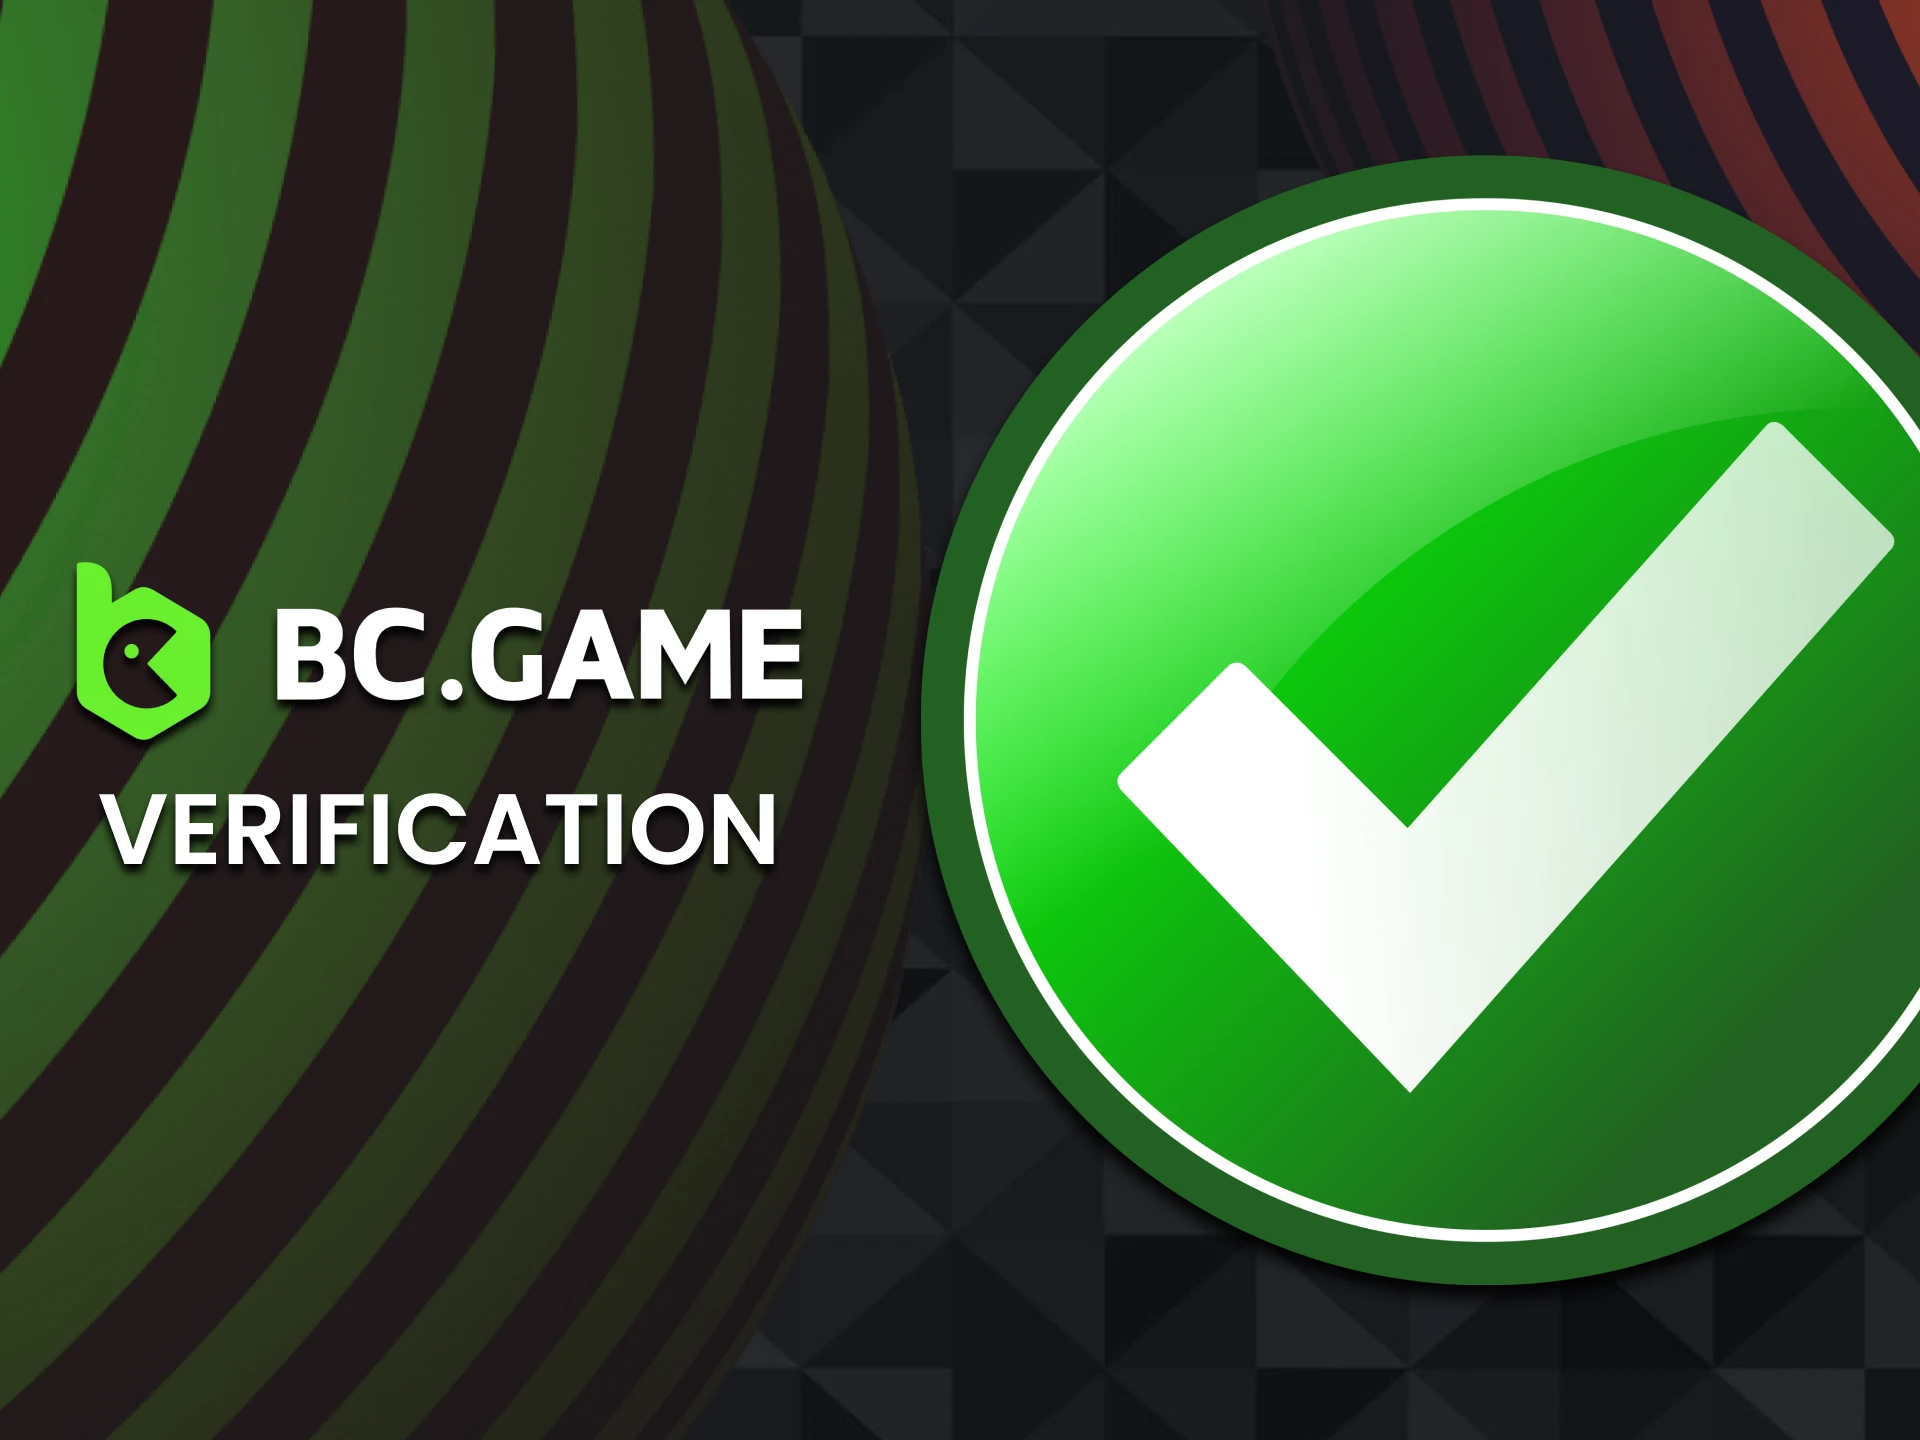 Verify your BC Game account and bet safely.